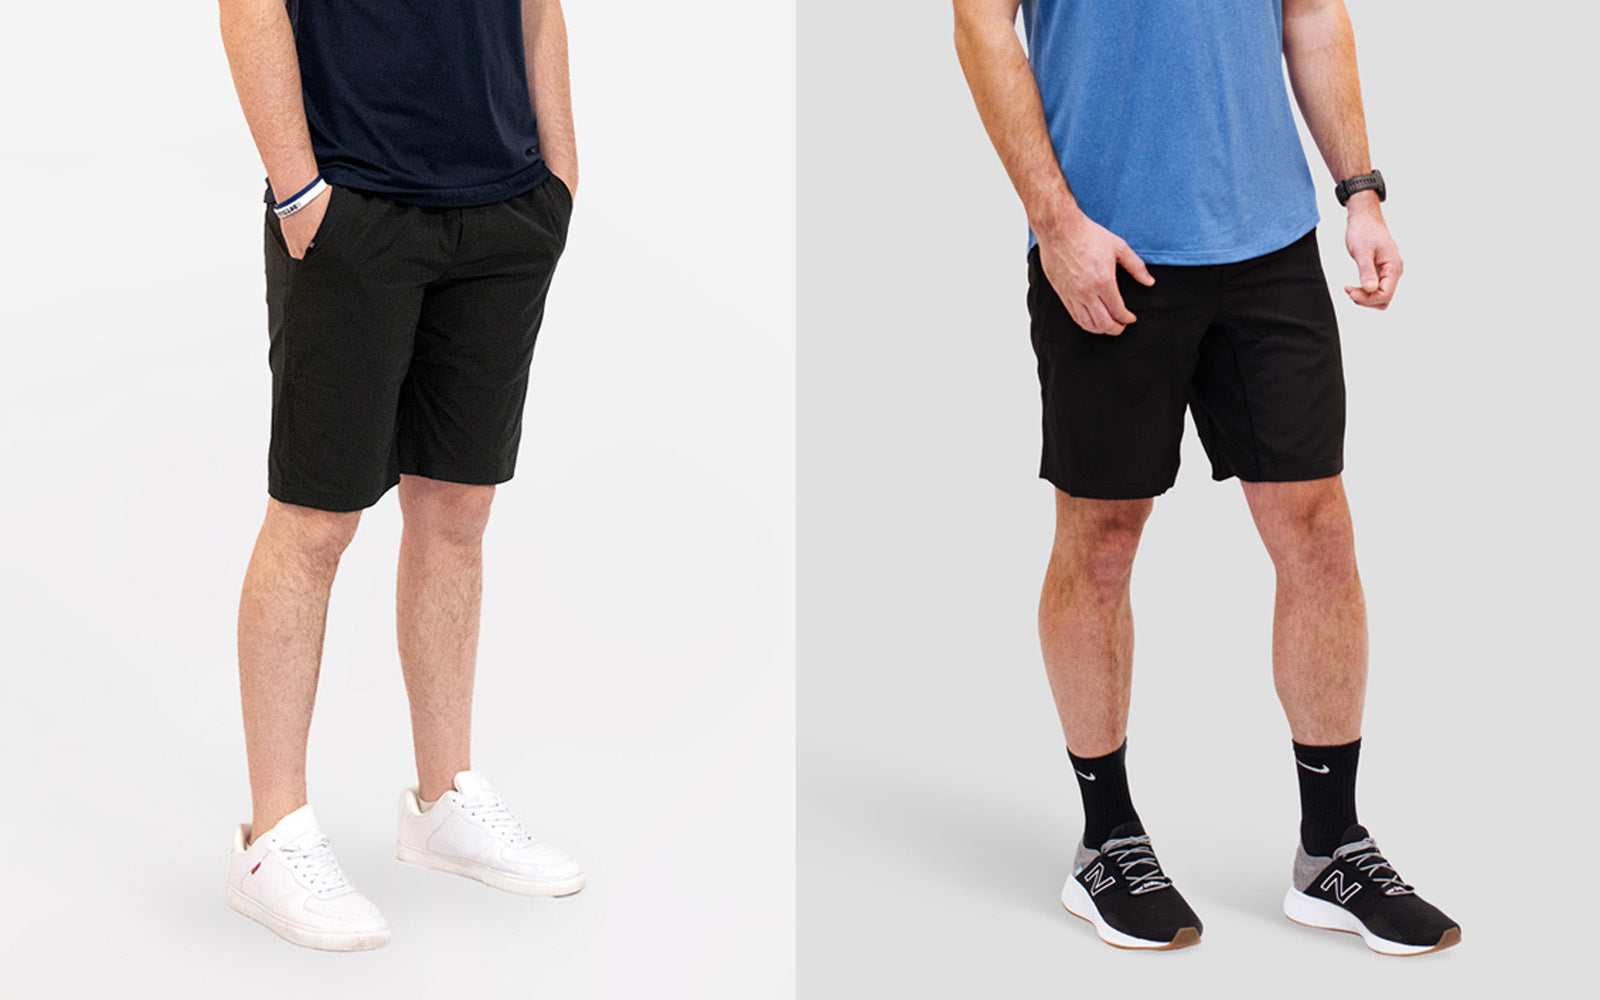 Comparing Our 2 Tall Shorts: What's Your Fit?